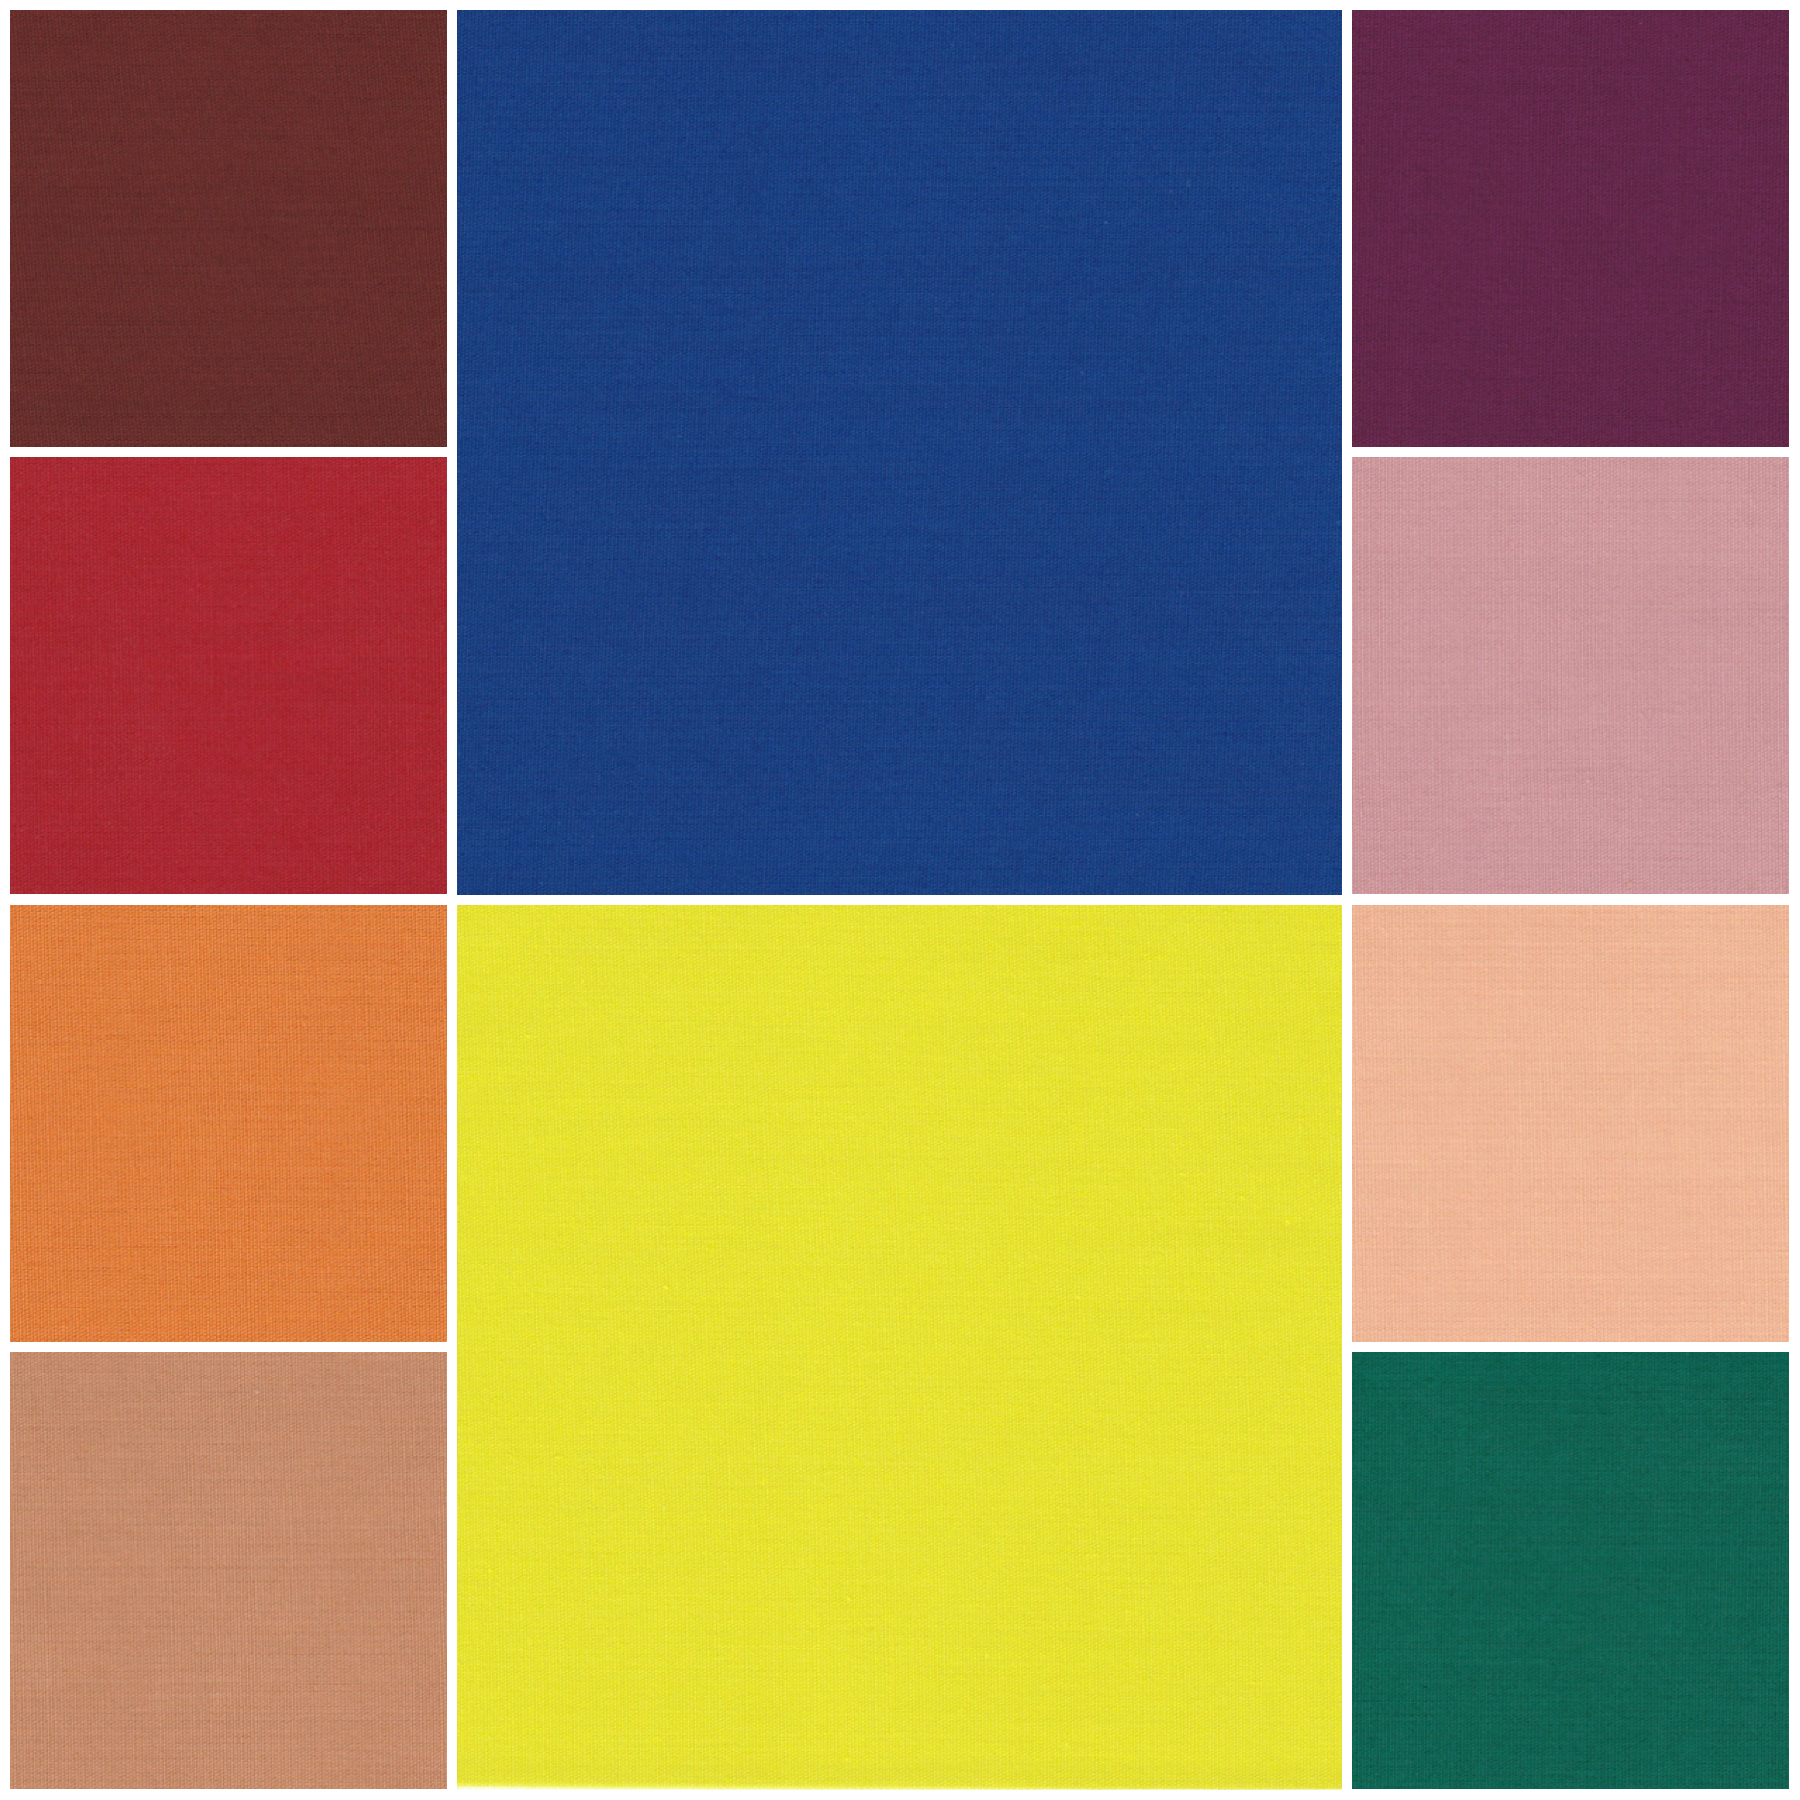 Top Fall 2020 Colours From Pantone For Autumn Weddings Hanami Dream Cotswold Wedding Inspiration,Storage Entryway Benches